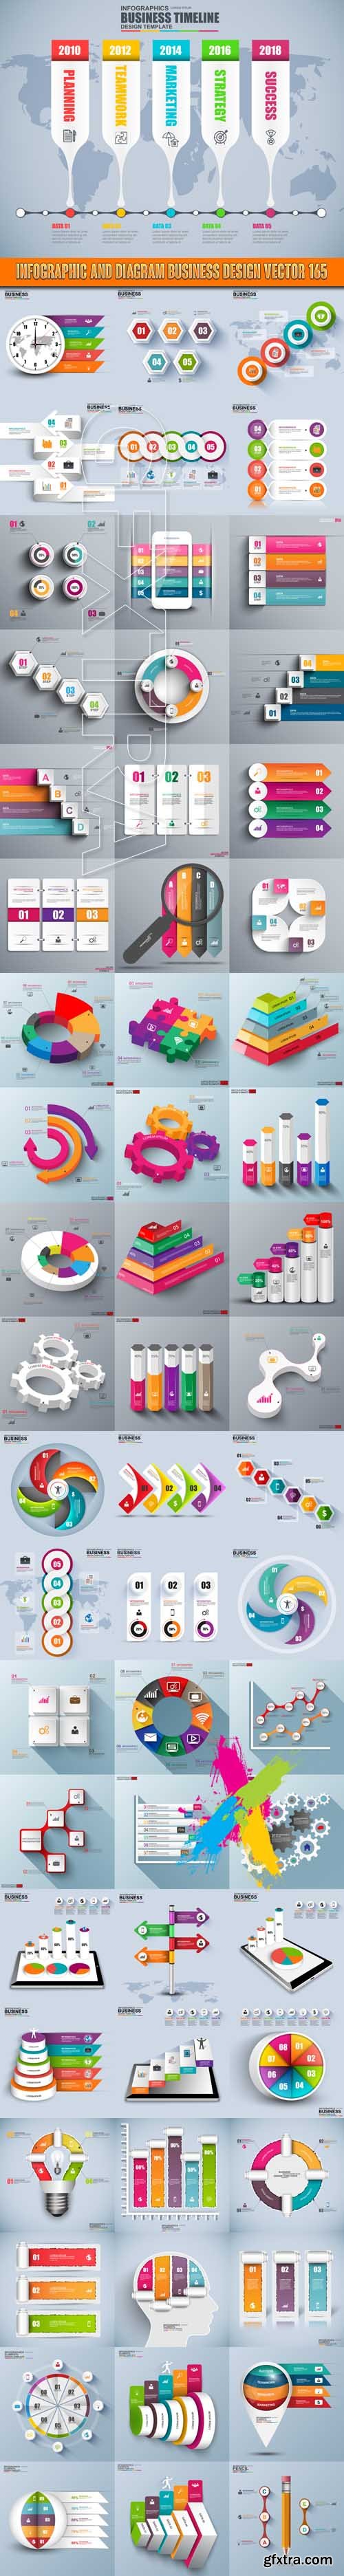 Infographic and diagram business design vector 165